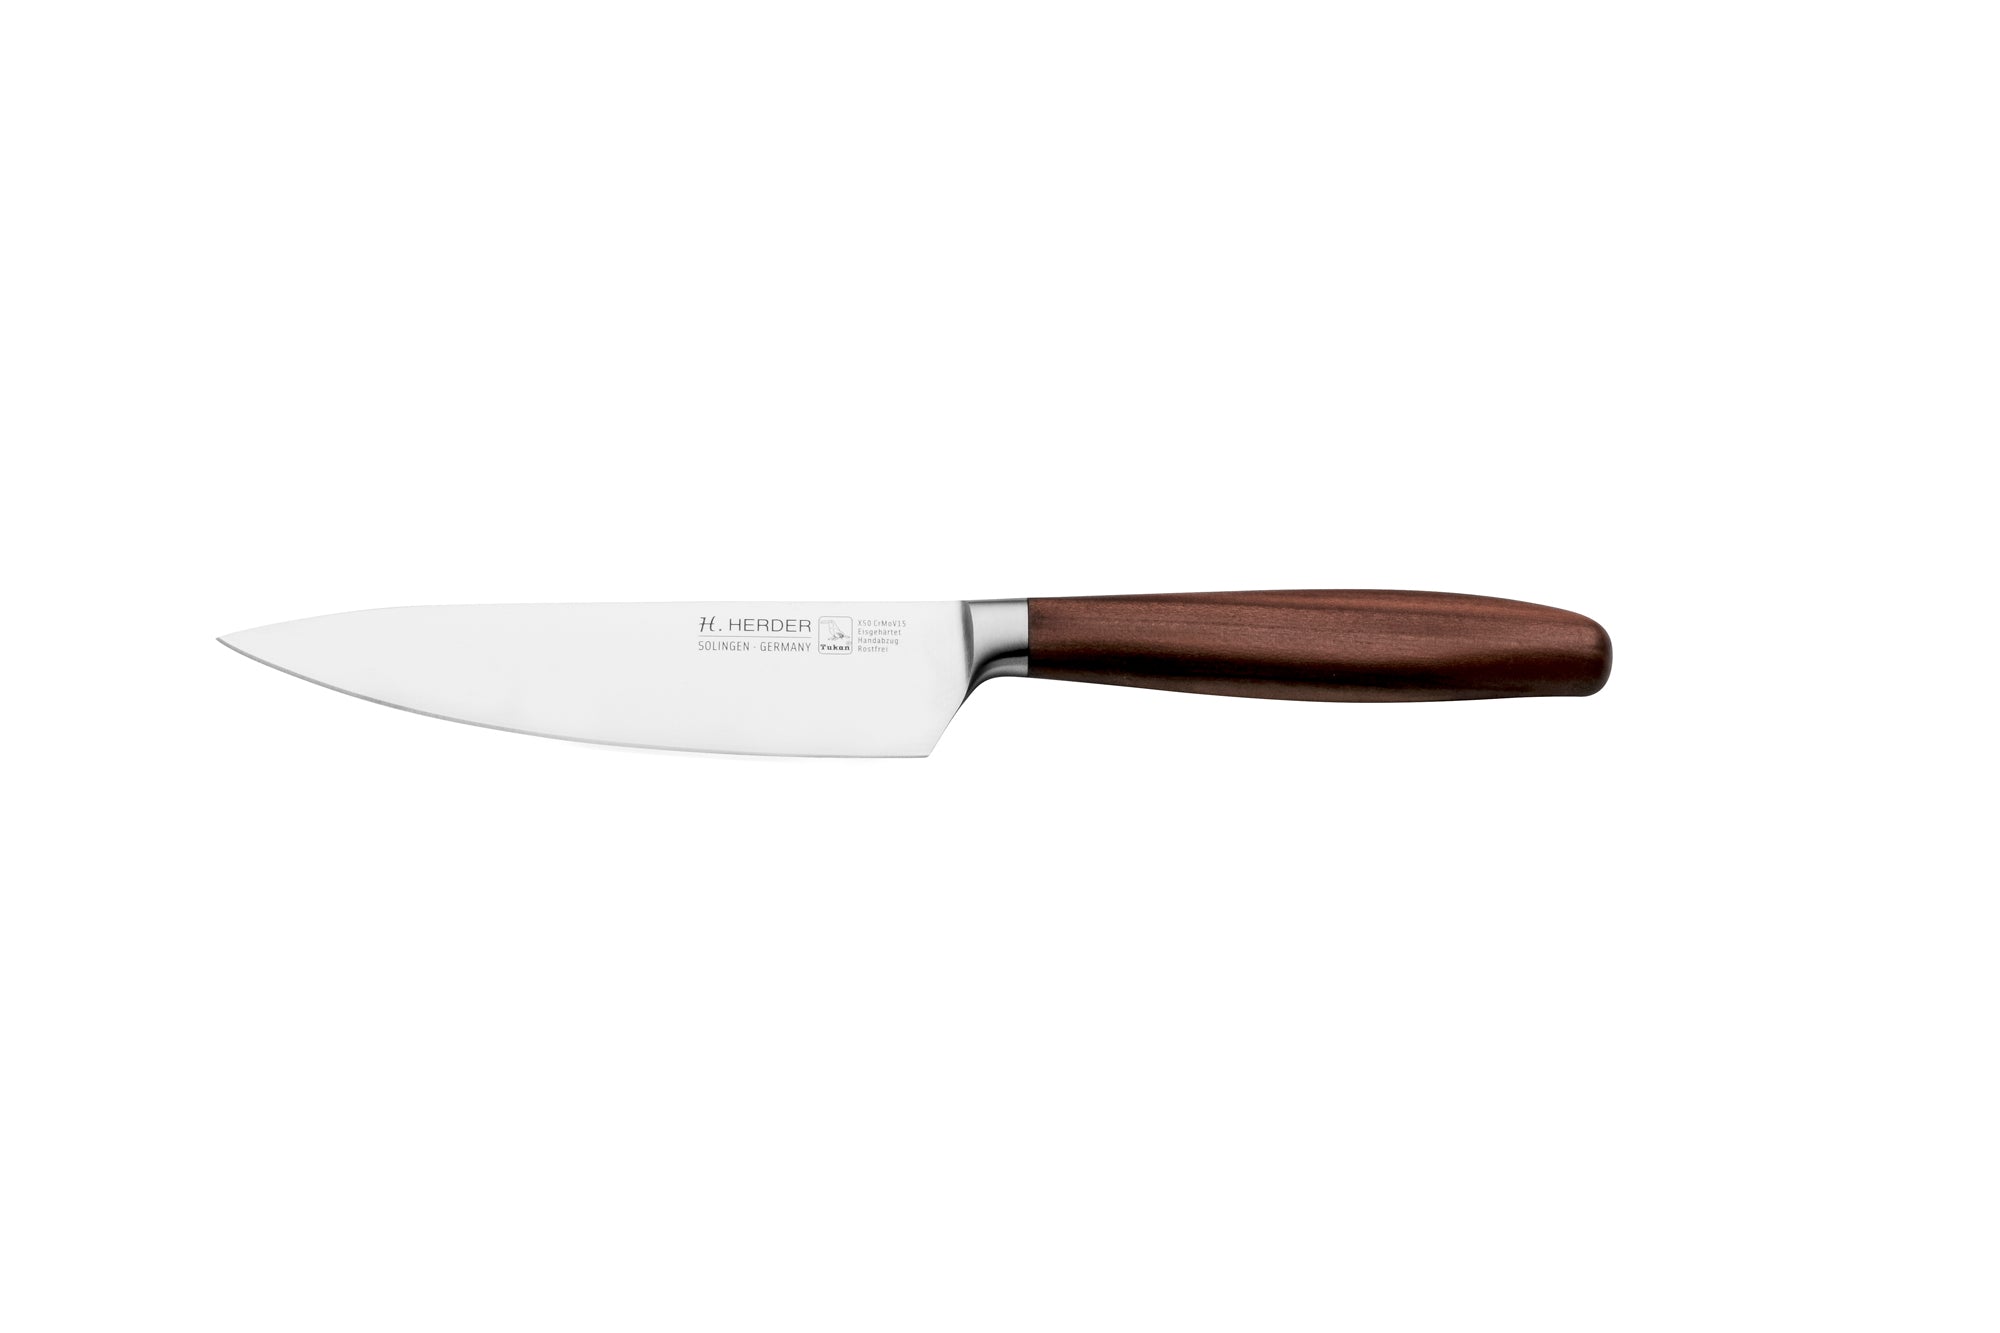 Paring knife Eterno, plum wood, blade length 7cm, forged, curved - Germany  Solingen